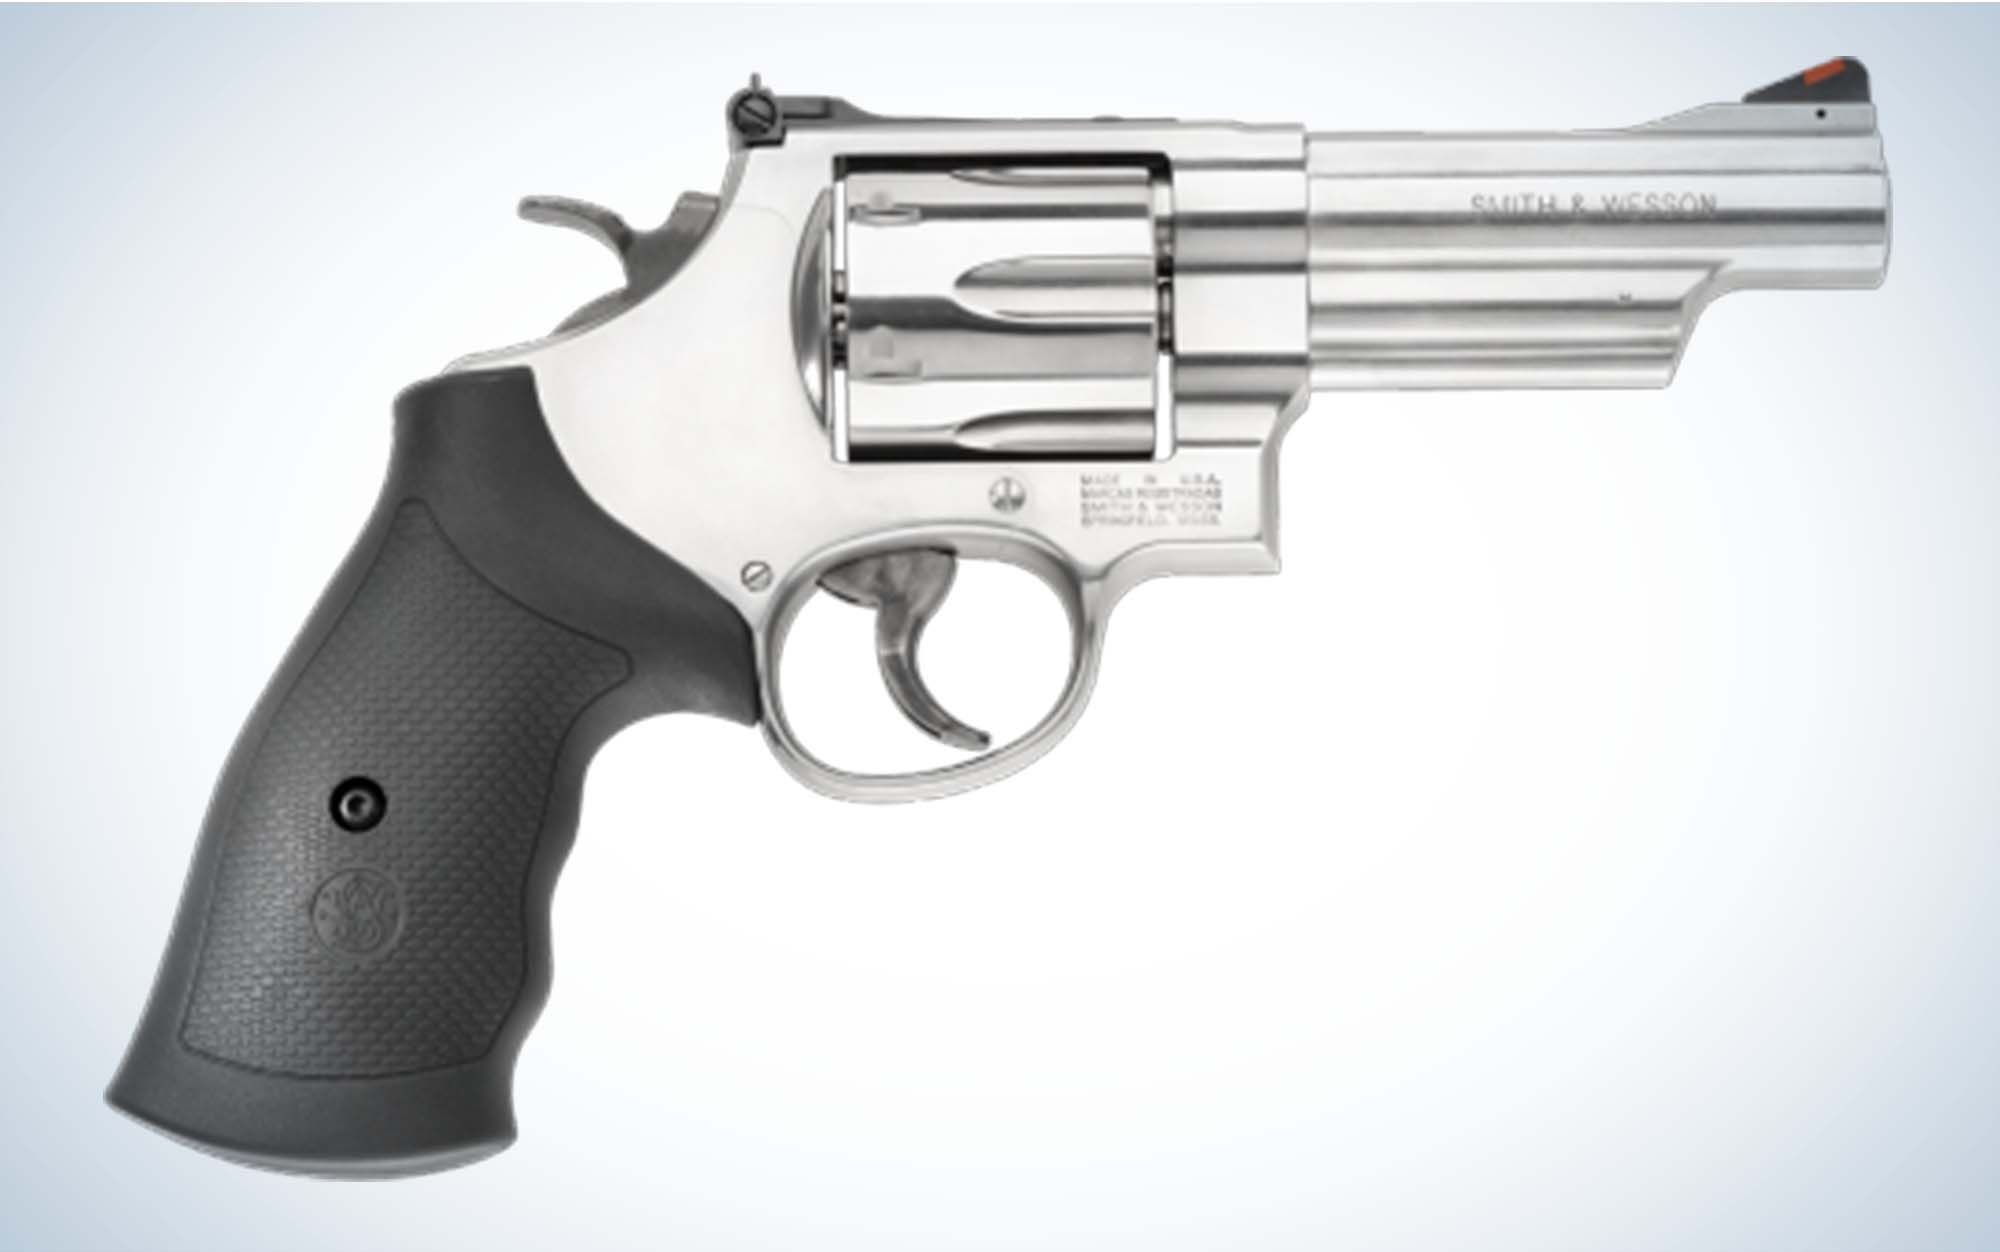 The Smith & Wesson 629 is a 44 magnum.